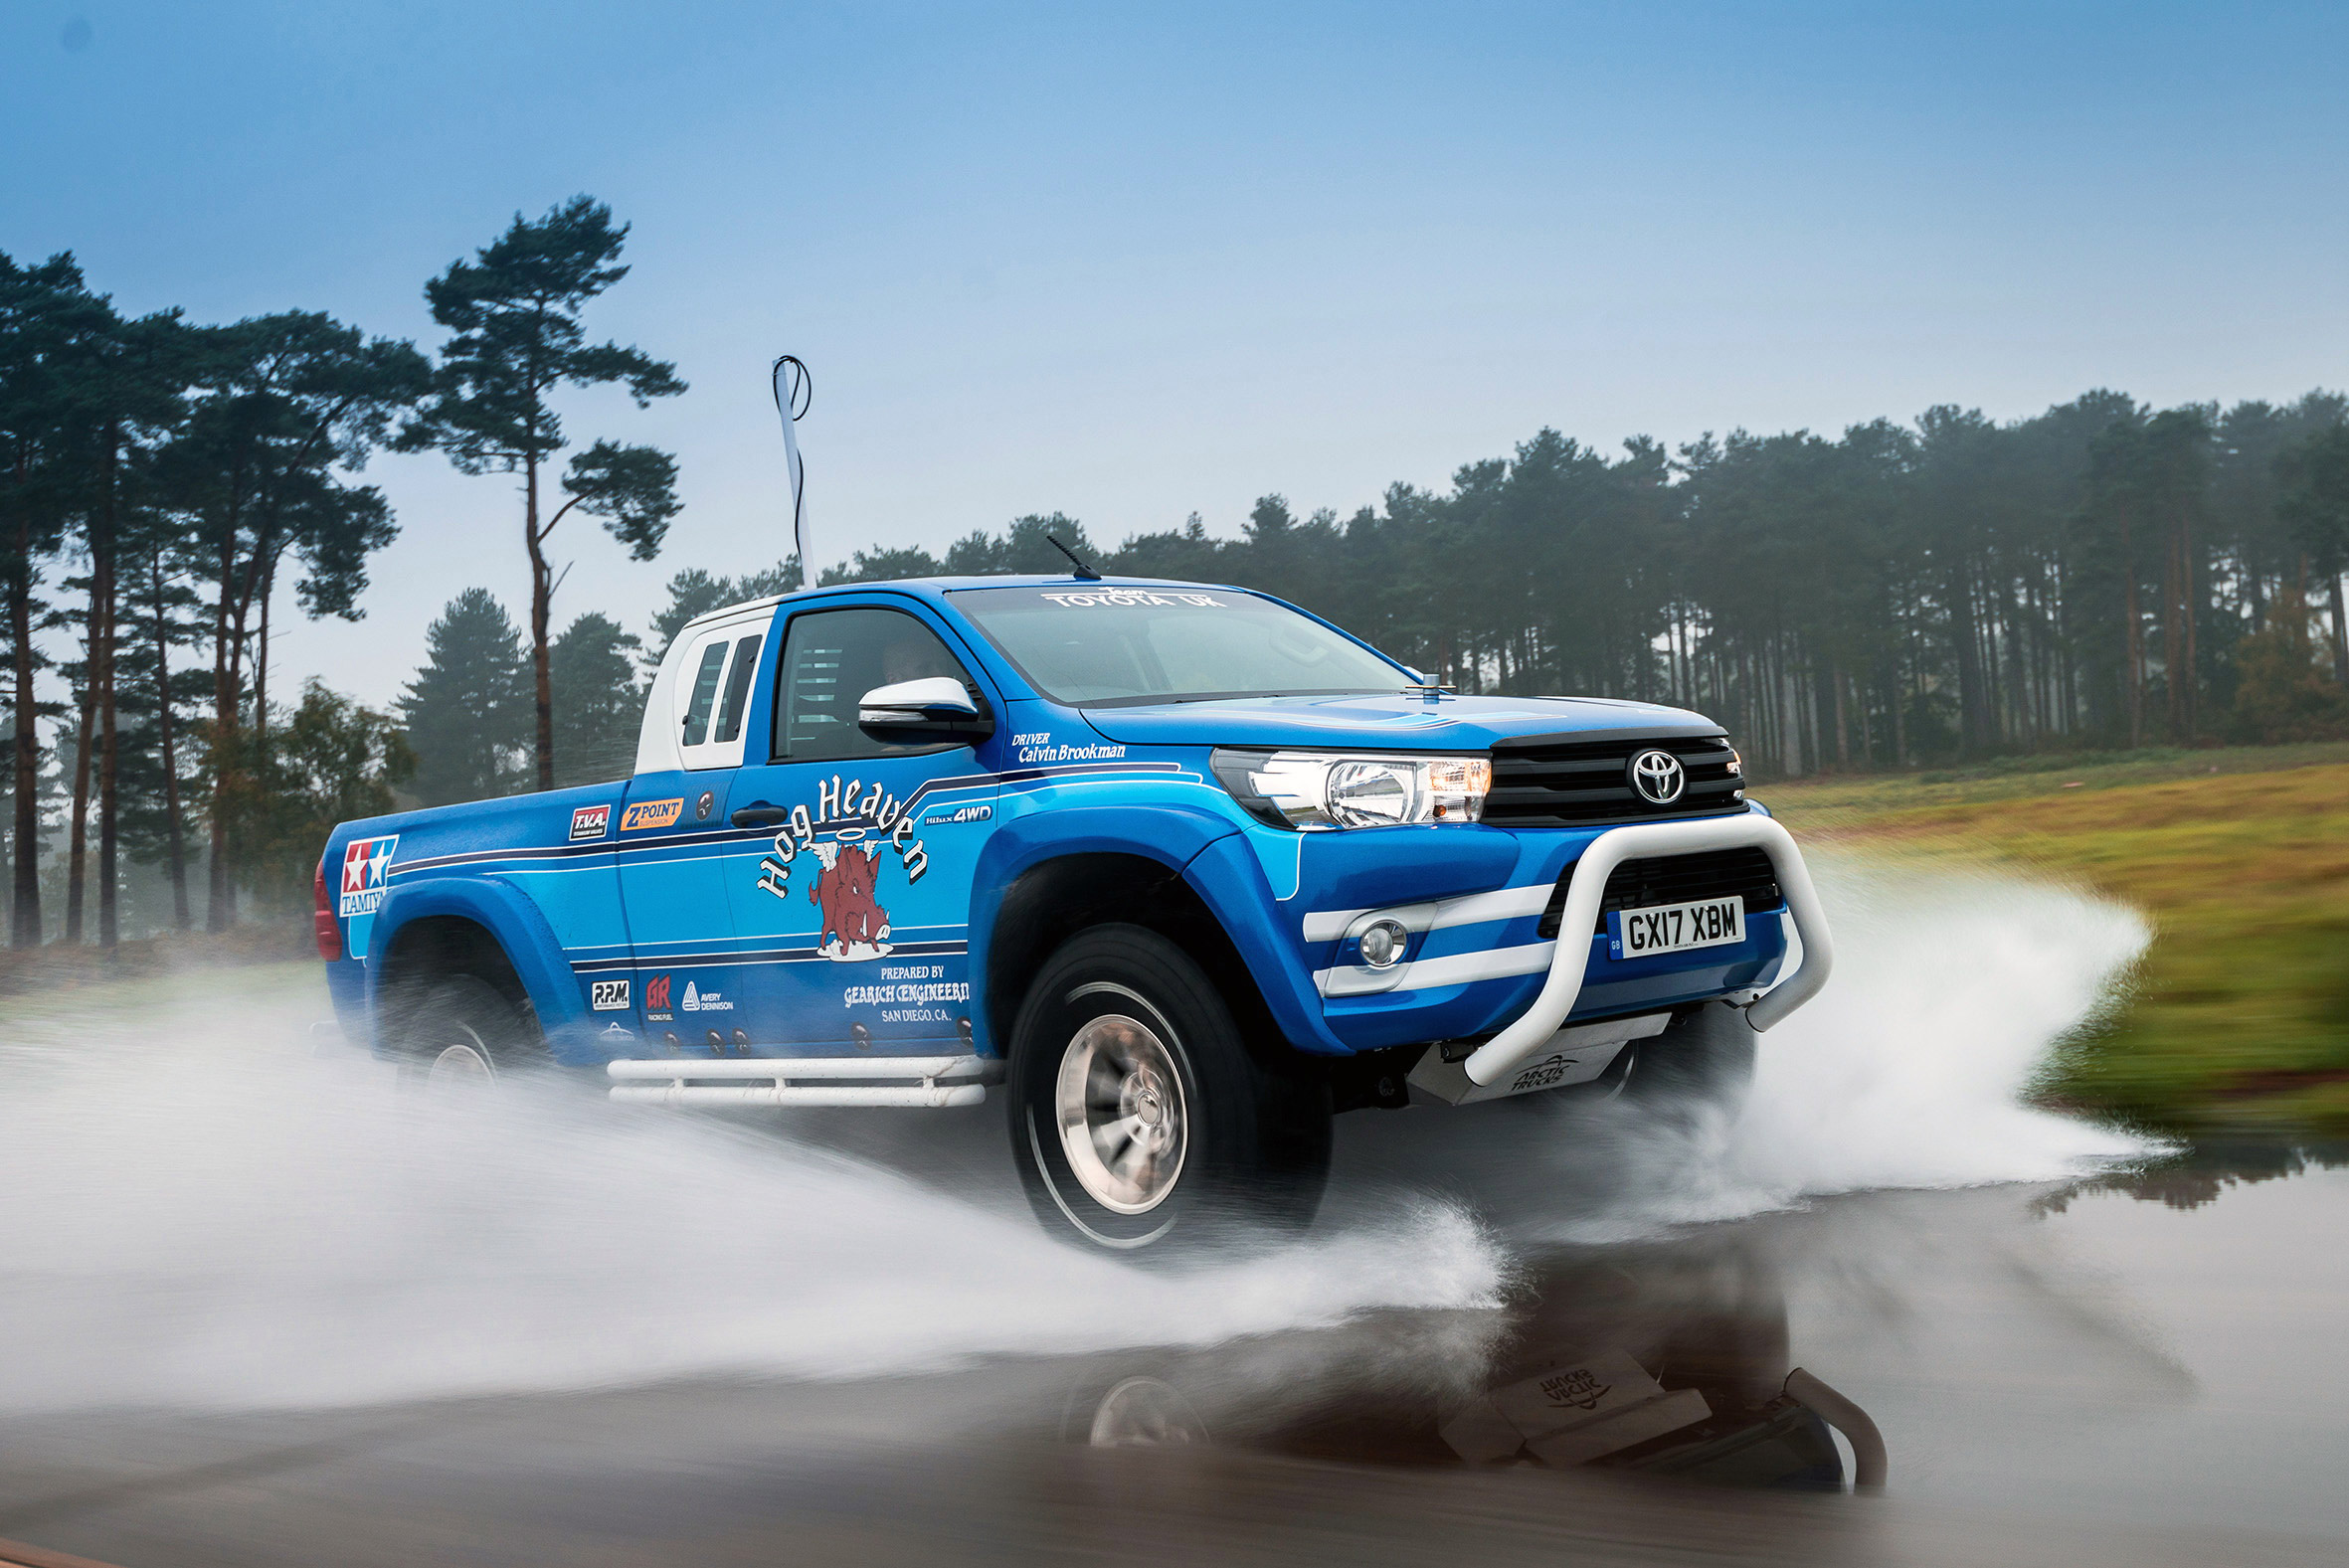 Toyota Hilux Bruiser 720P HD 4k Wallpaper, Image, Background, Photo and Picture